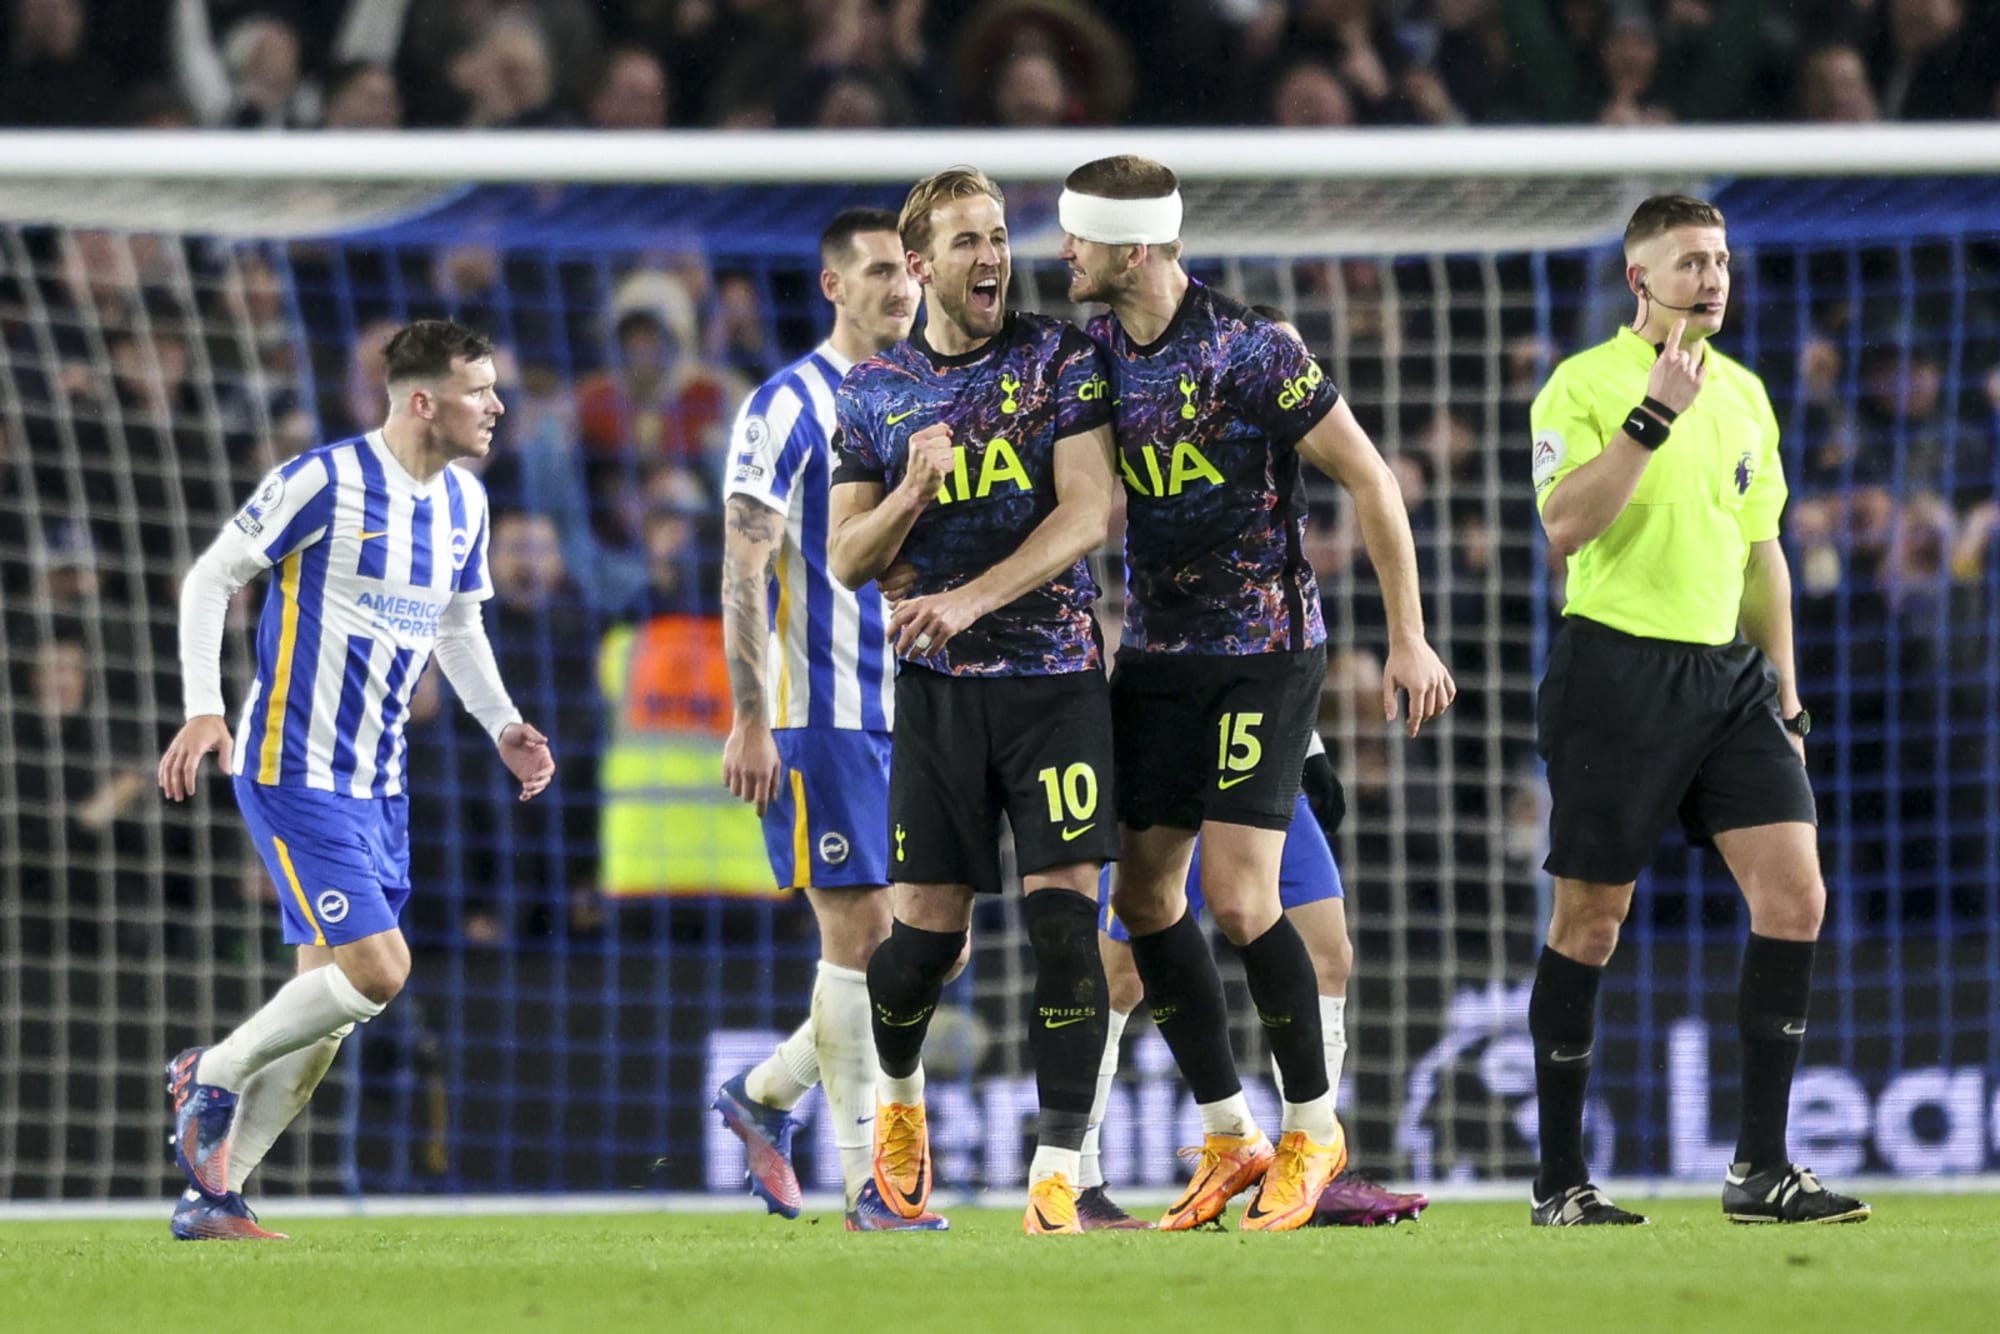 Player ratings from Tottenham Hotspur win at Brighton in the Premier League